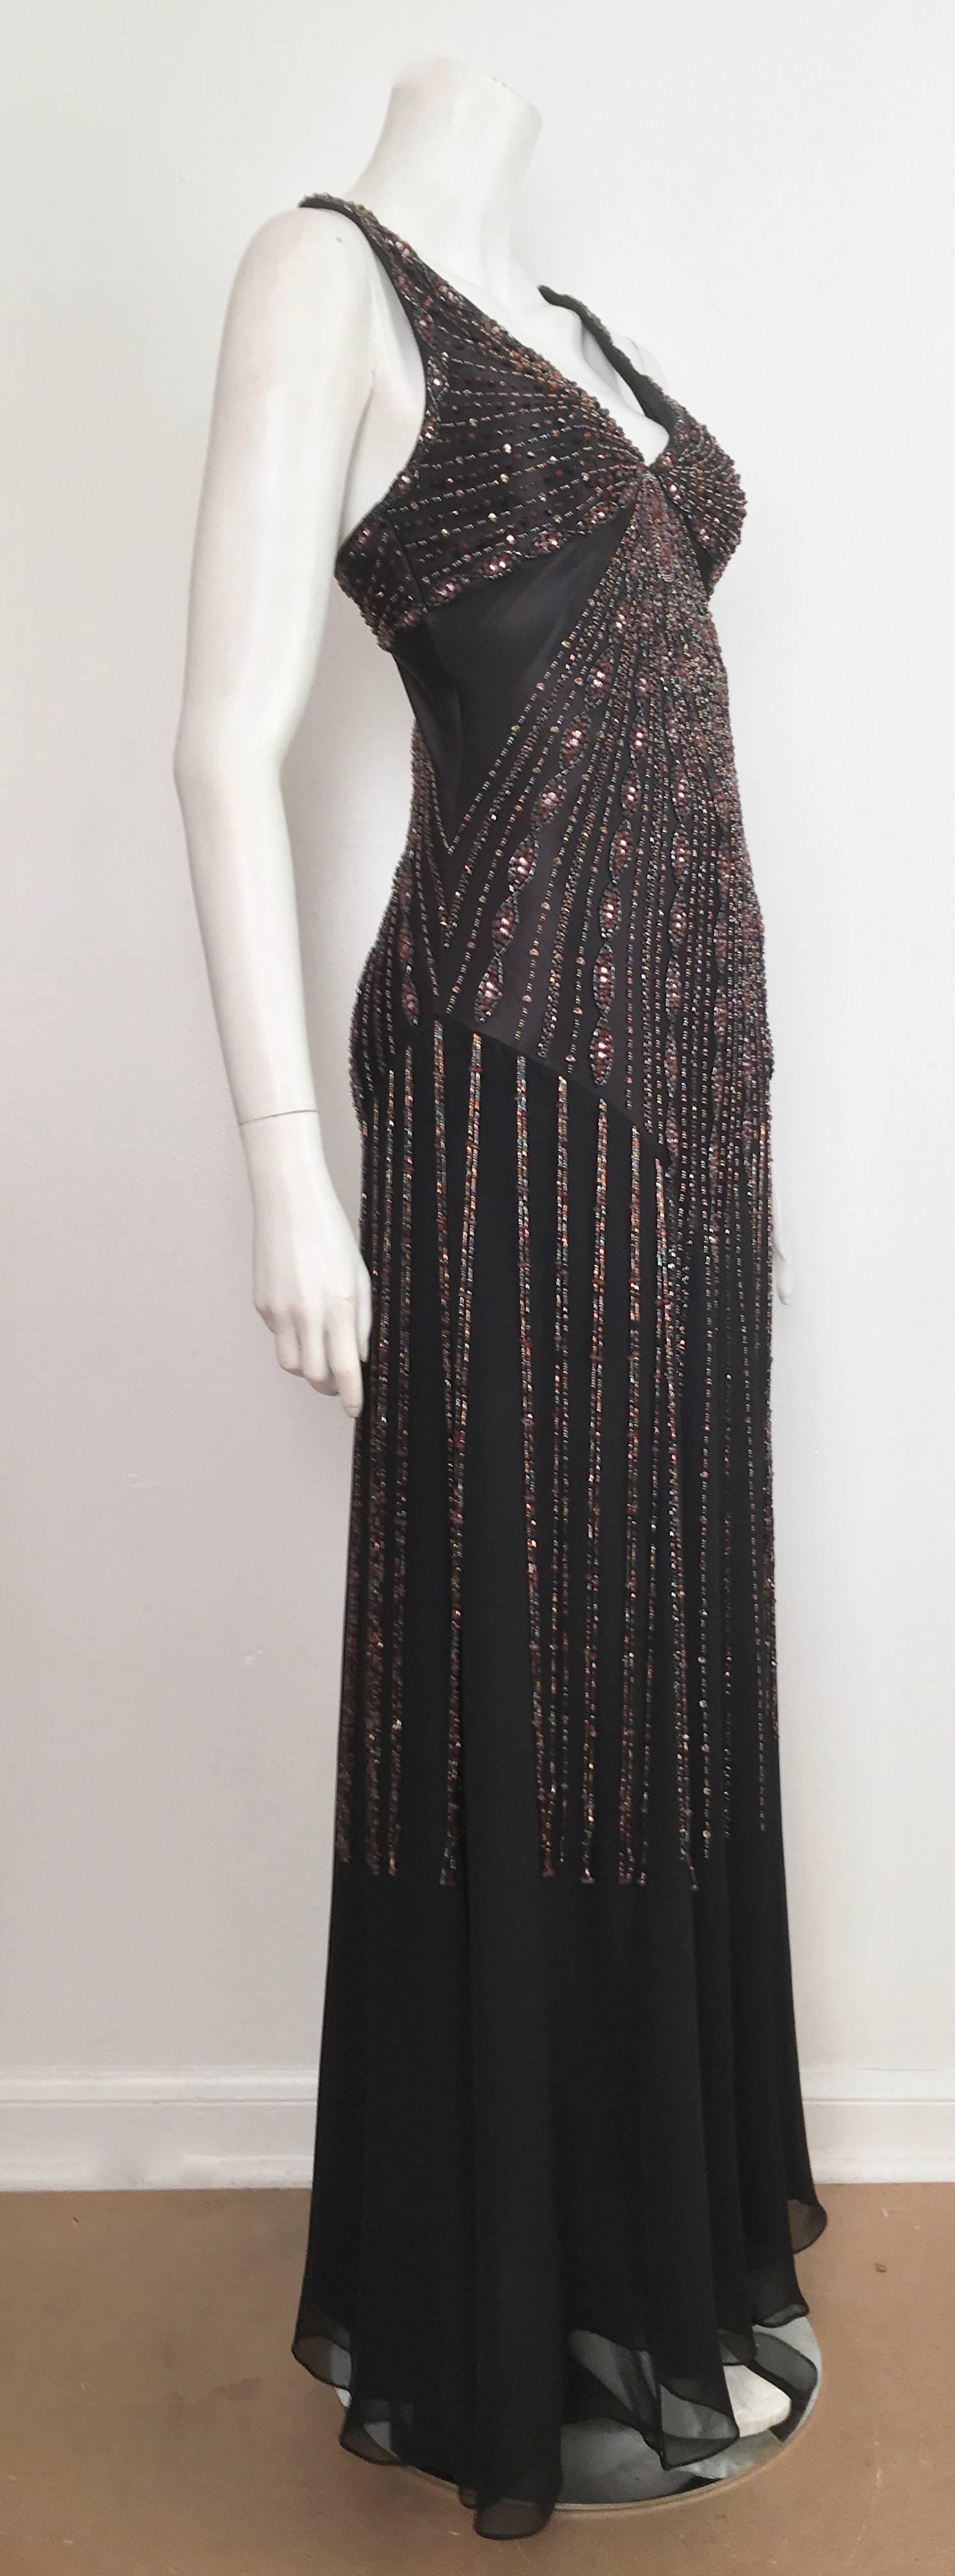 Sue Wong black silk beaded sleeveless evening maxi bias cut dress is a size 2. This magnificent and most elegant sexy maxi dress is a real eye catcher. Zipper on the side and dress is lined. Wear your Dior heels and go dance the night